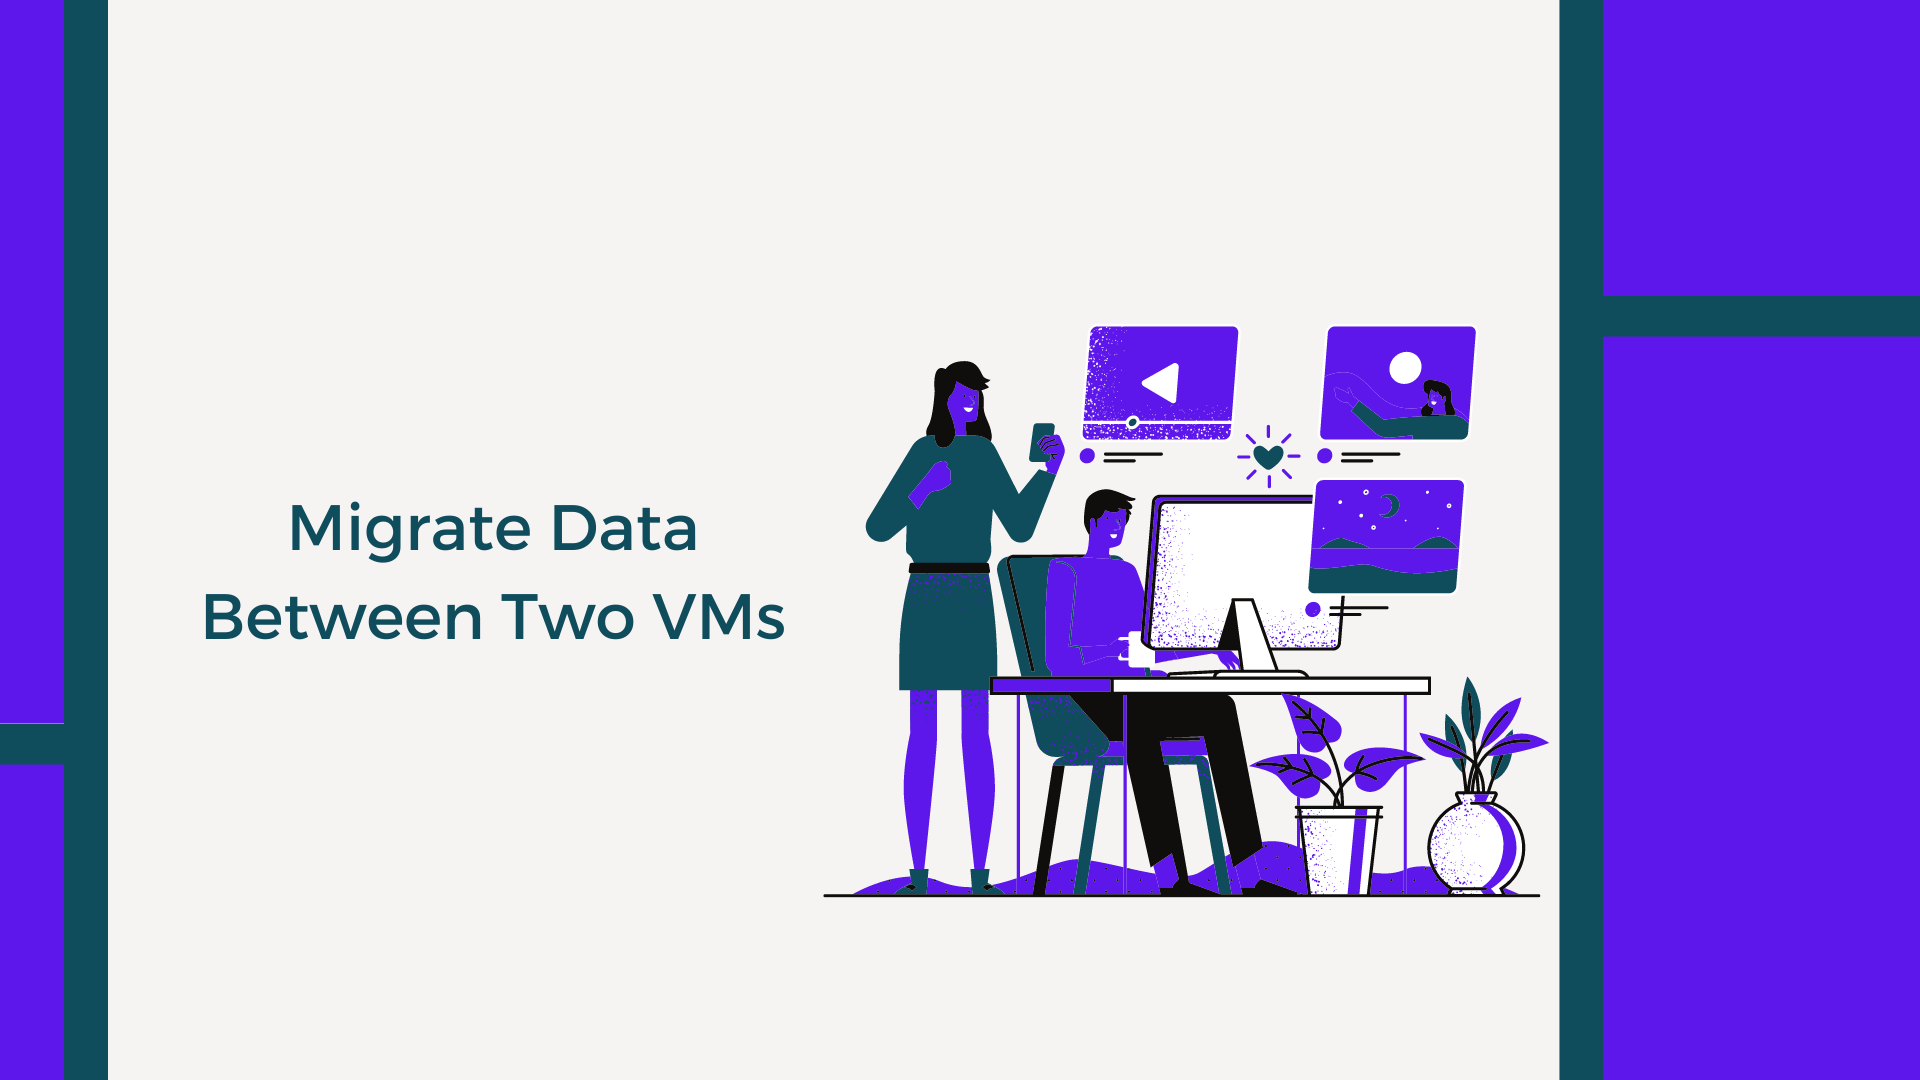 Migrate Data Between Two VMs